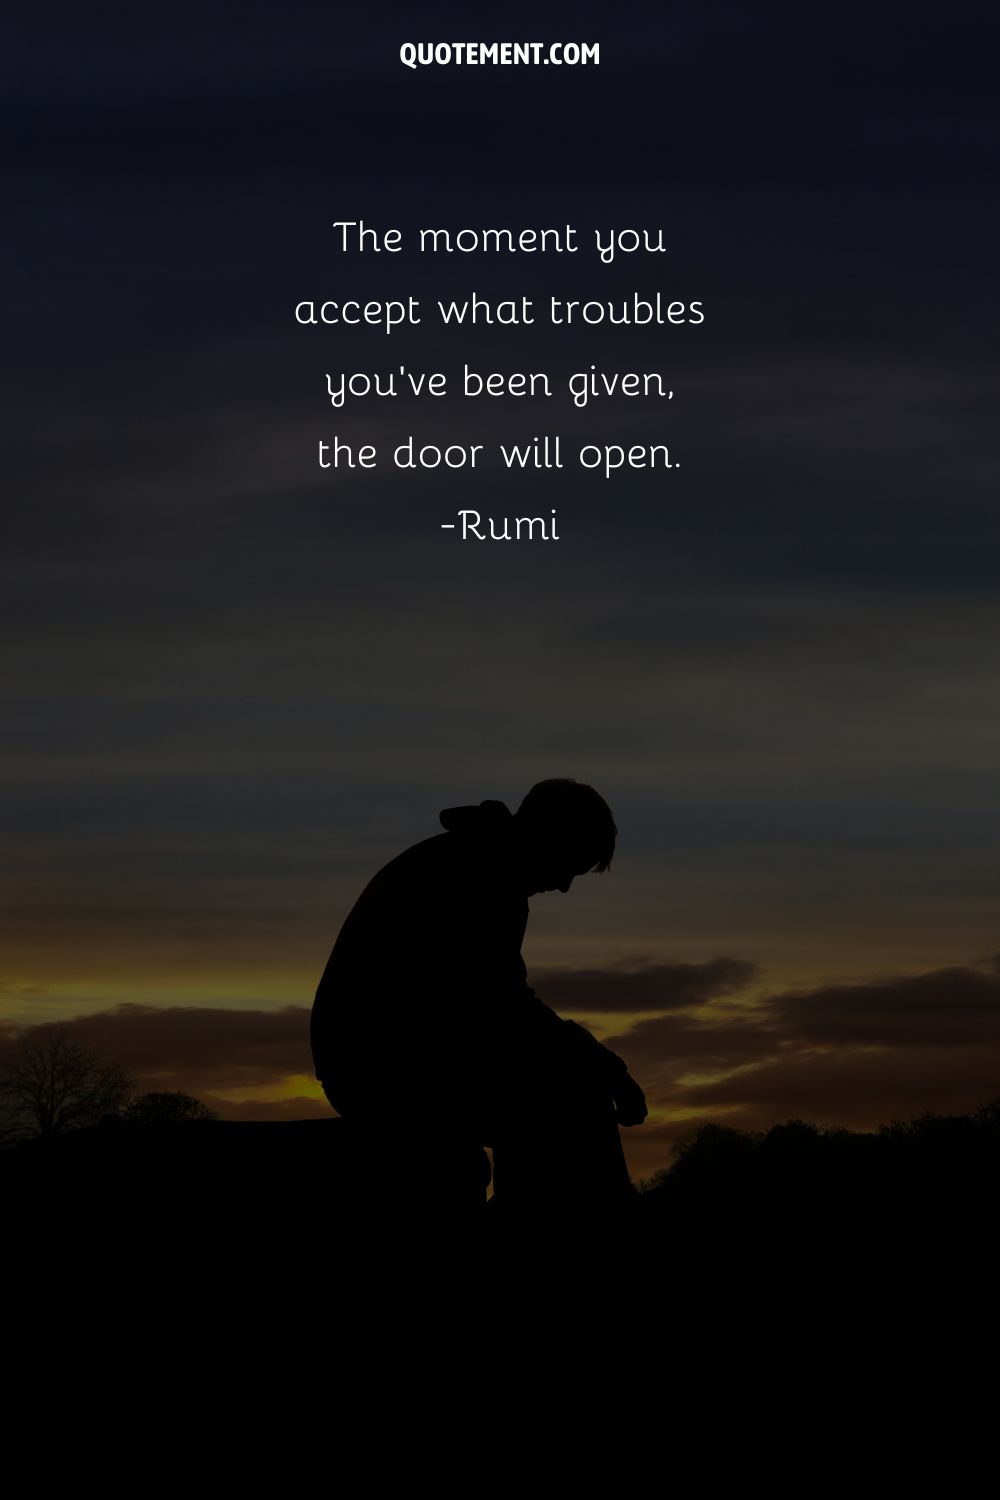 The moment you accept what troubles you’ve been given, the door will open